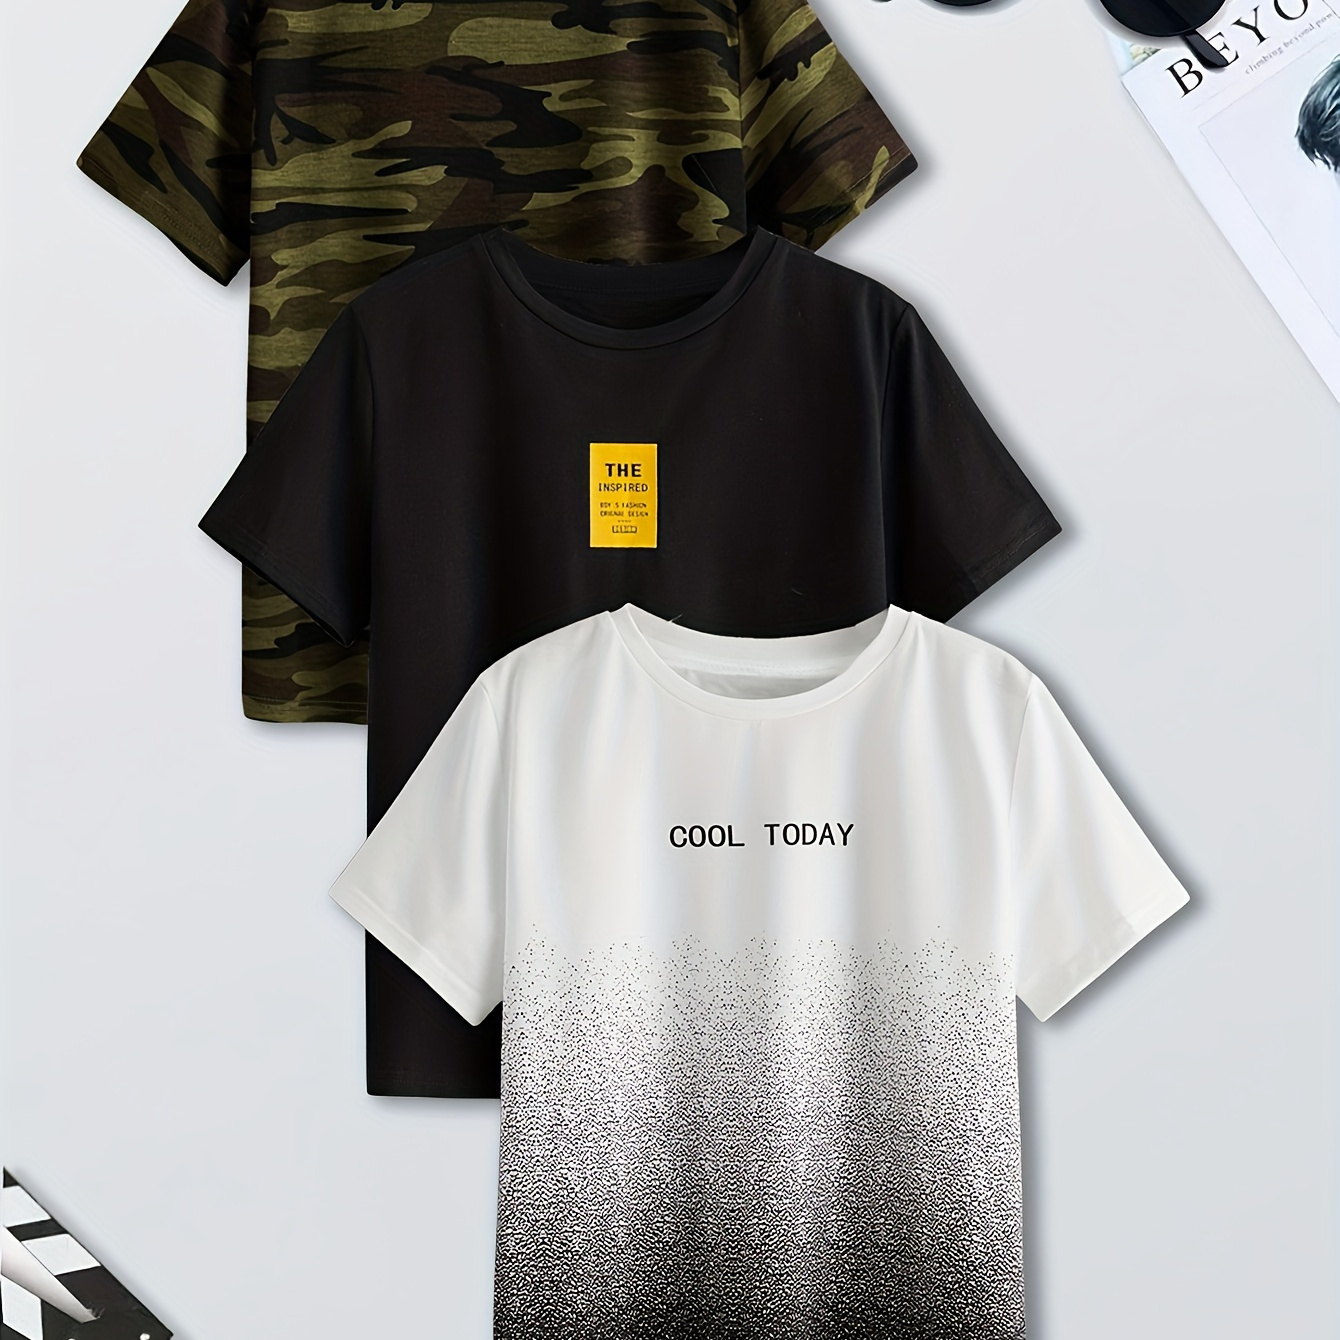 

3pcs Camouflage, Letter And Gradient Print T-shirt - Vibrant Short Sleeve Tee For Summer Fun - Casual Style For Boys And Girls